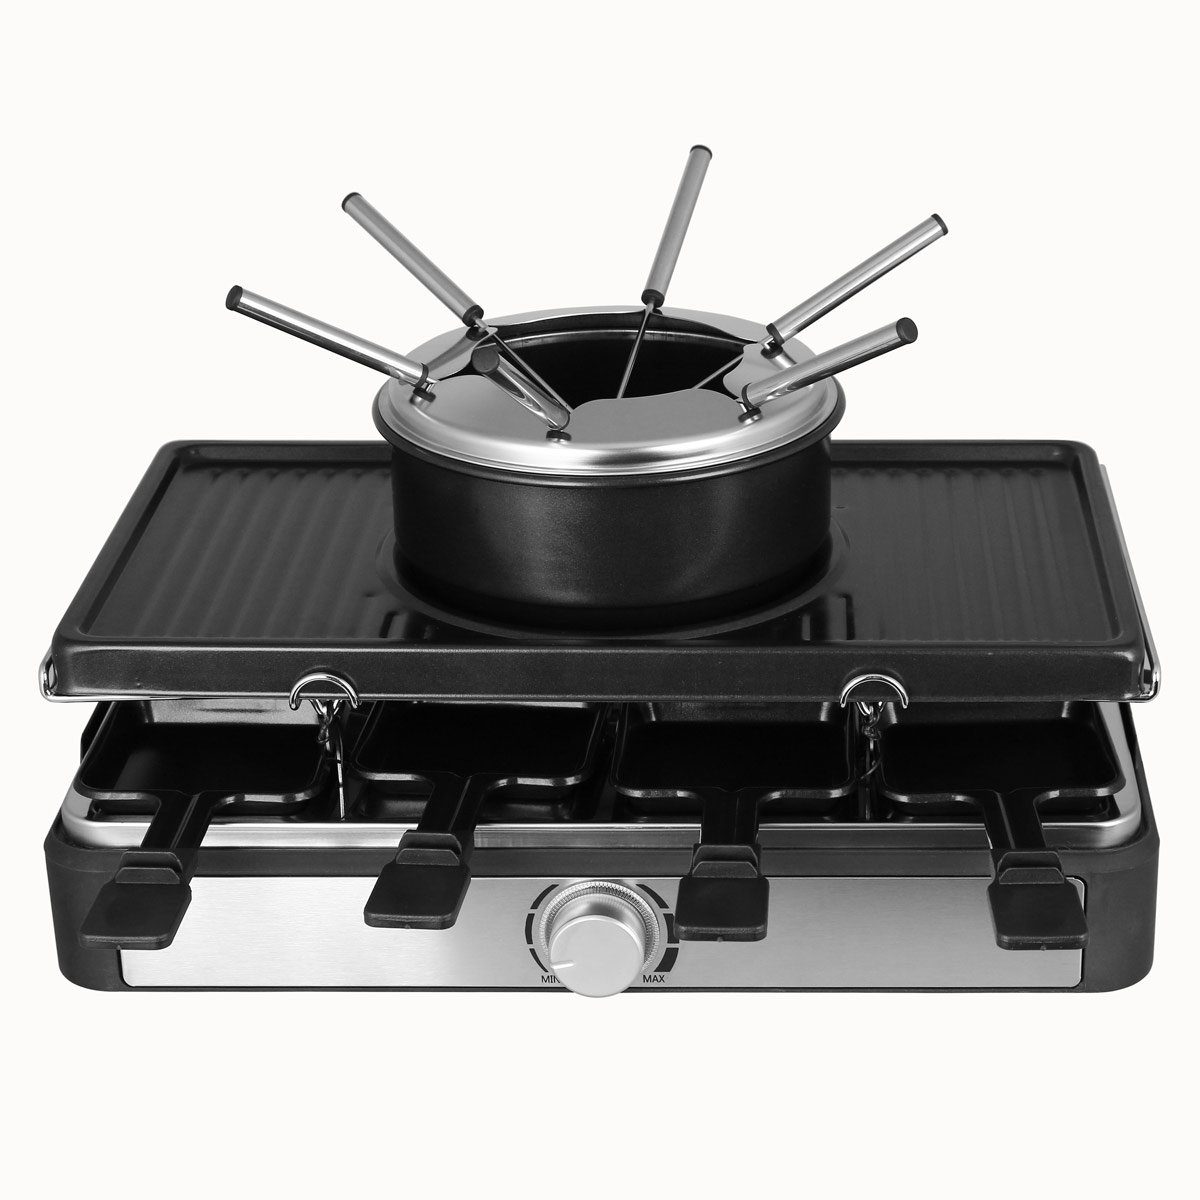 Emerio Raclette RG 124930, 3 in 1 Raclette, Grill und Fondue Set, 1300 W